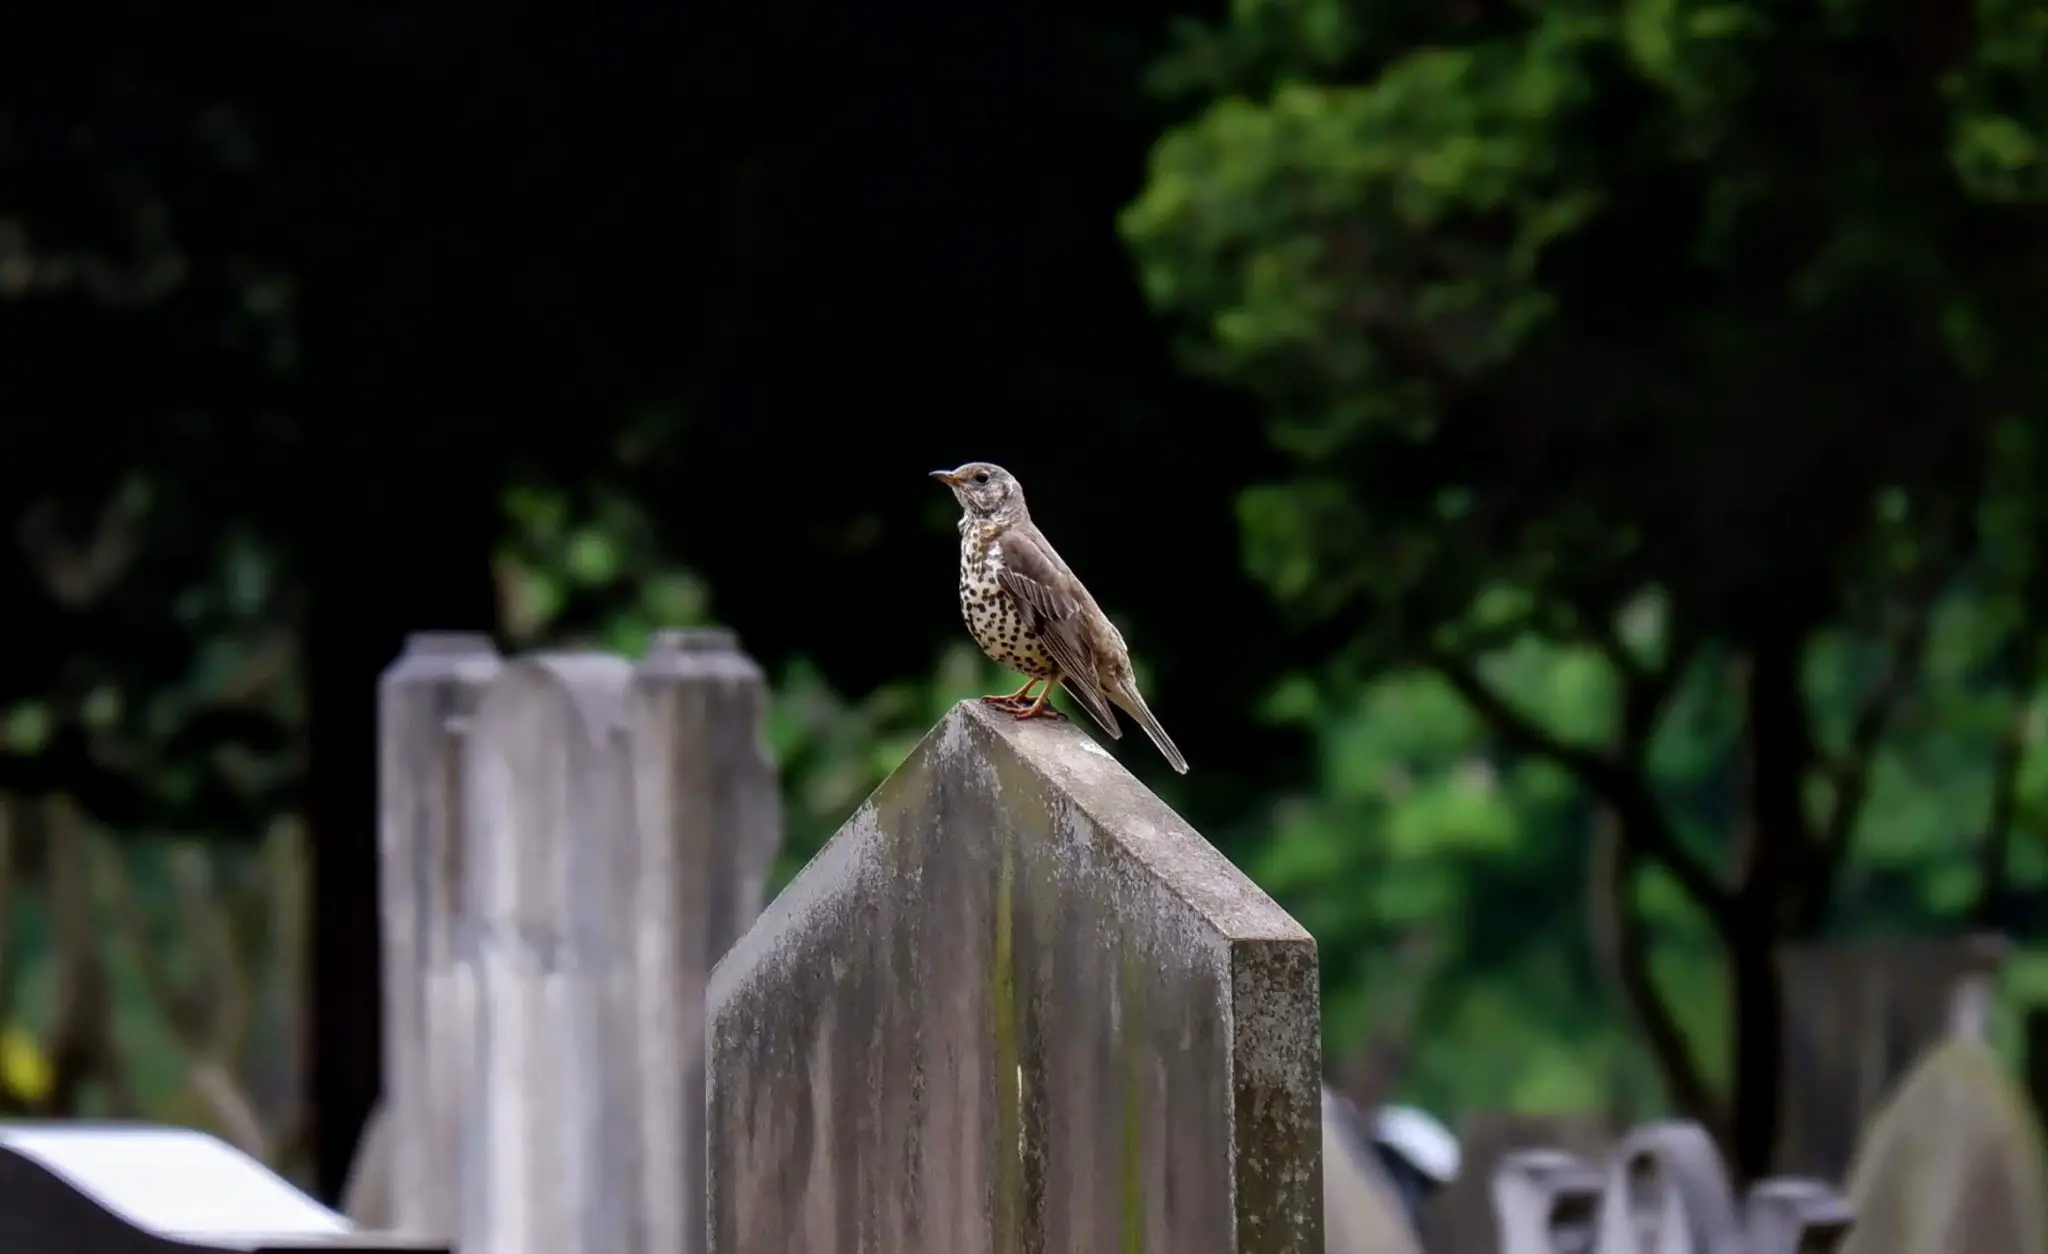 Song thrush in Southern Cemetery in Manchester